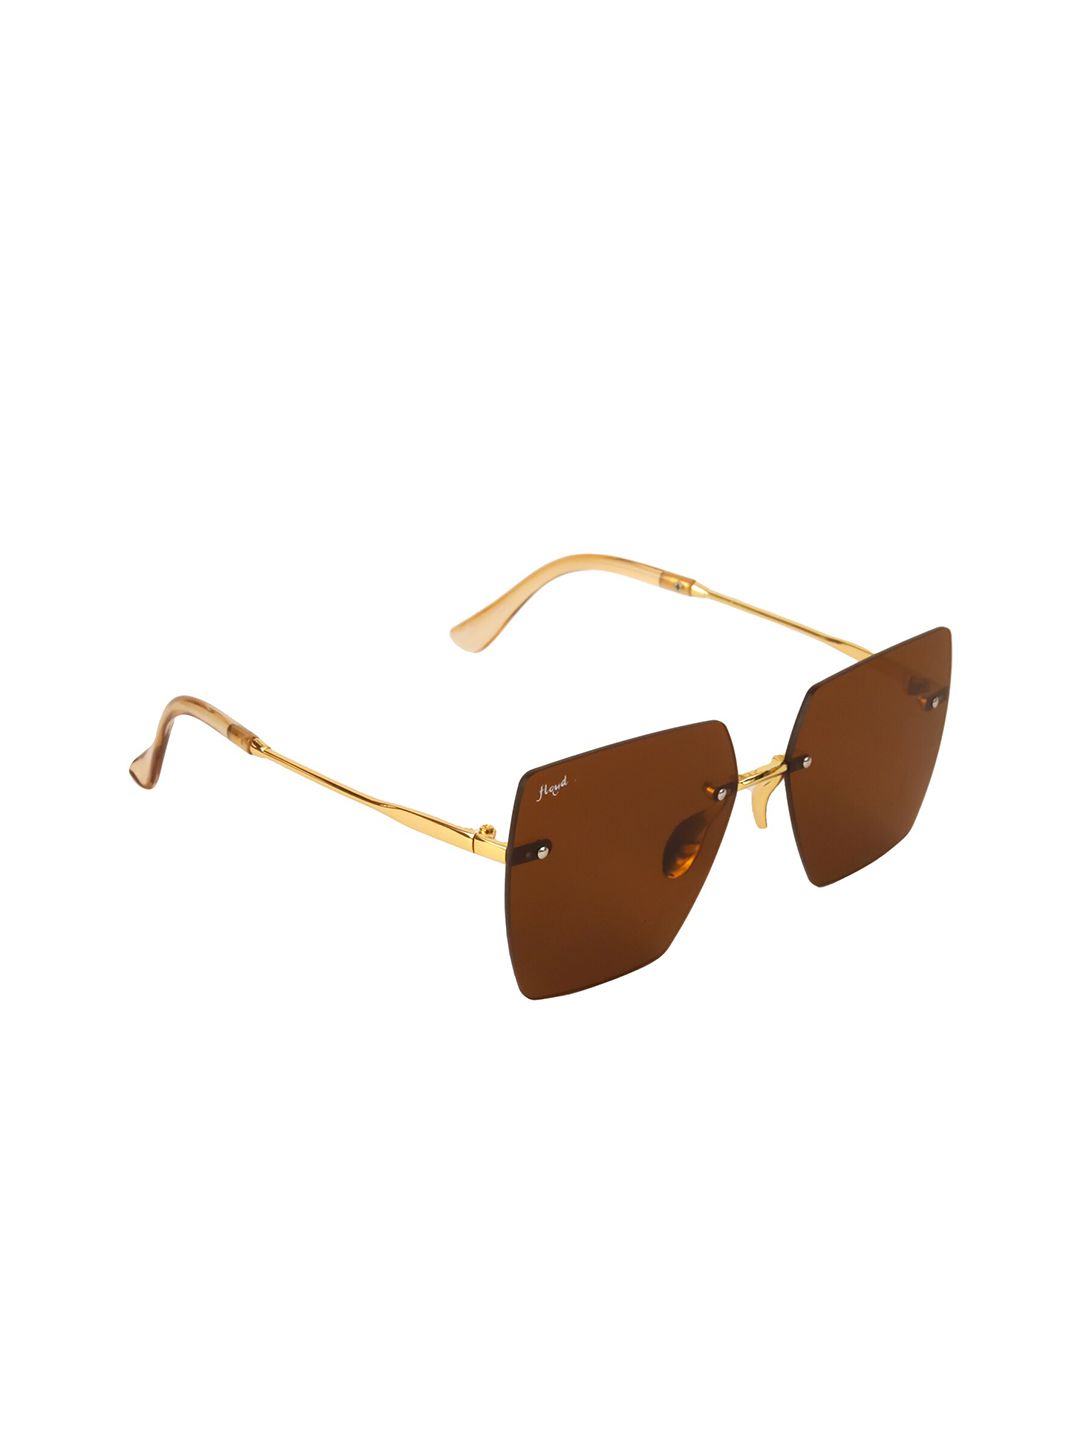 Floyd Unisex Brown Lens & Gold-Toned Square Sunglasses with UV Protected Lens Price in India